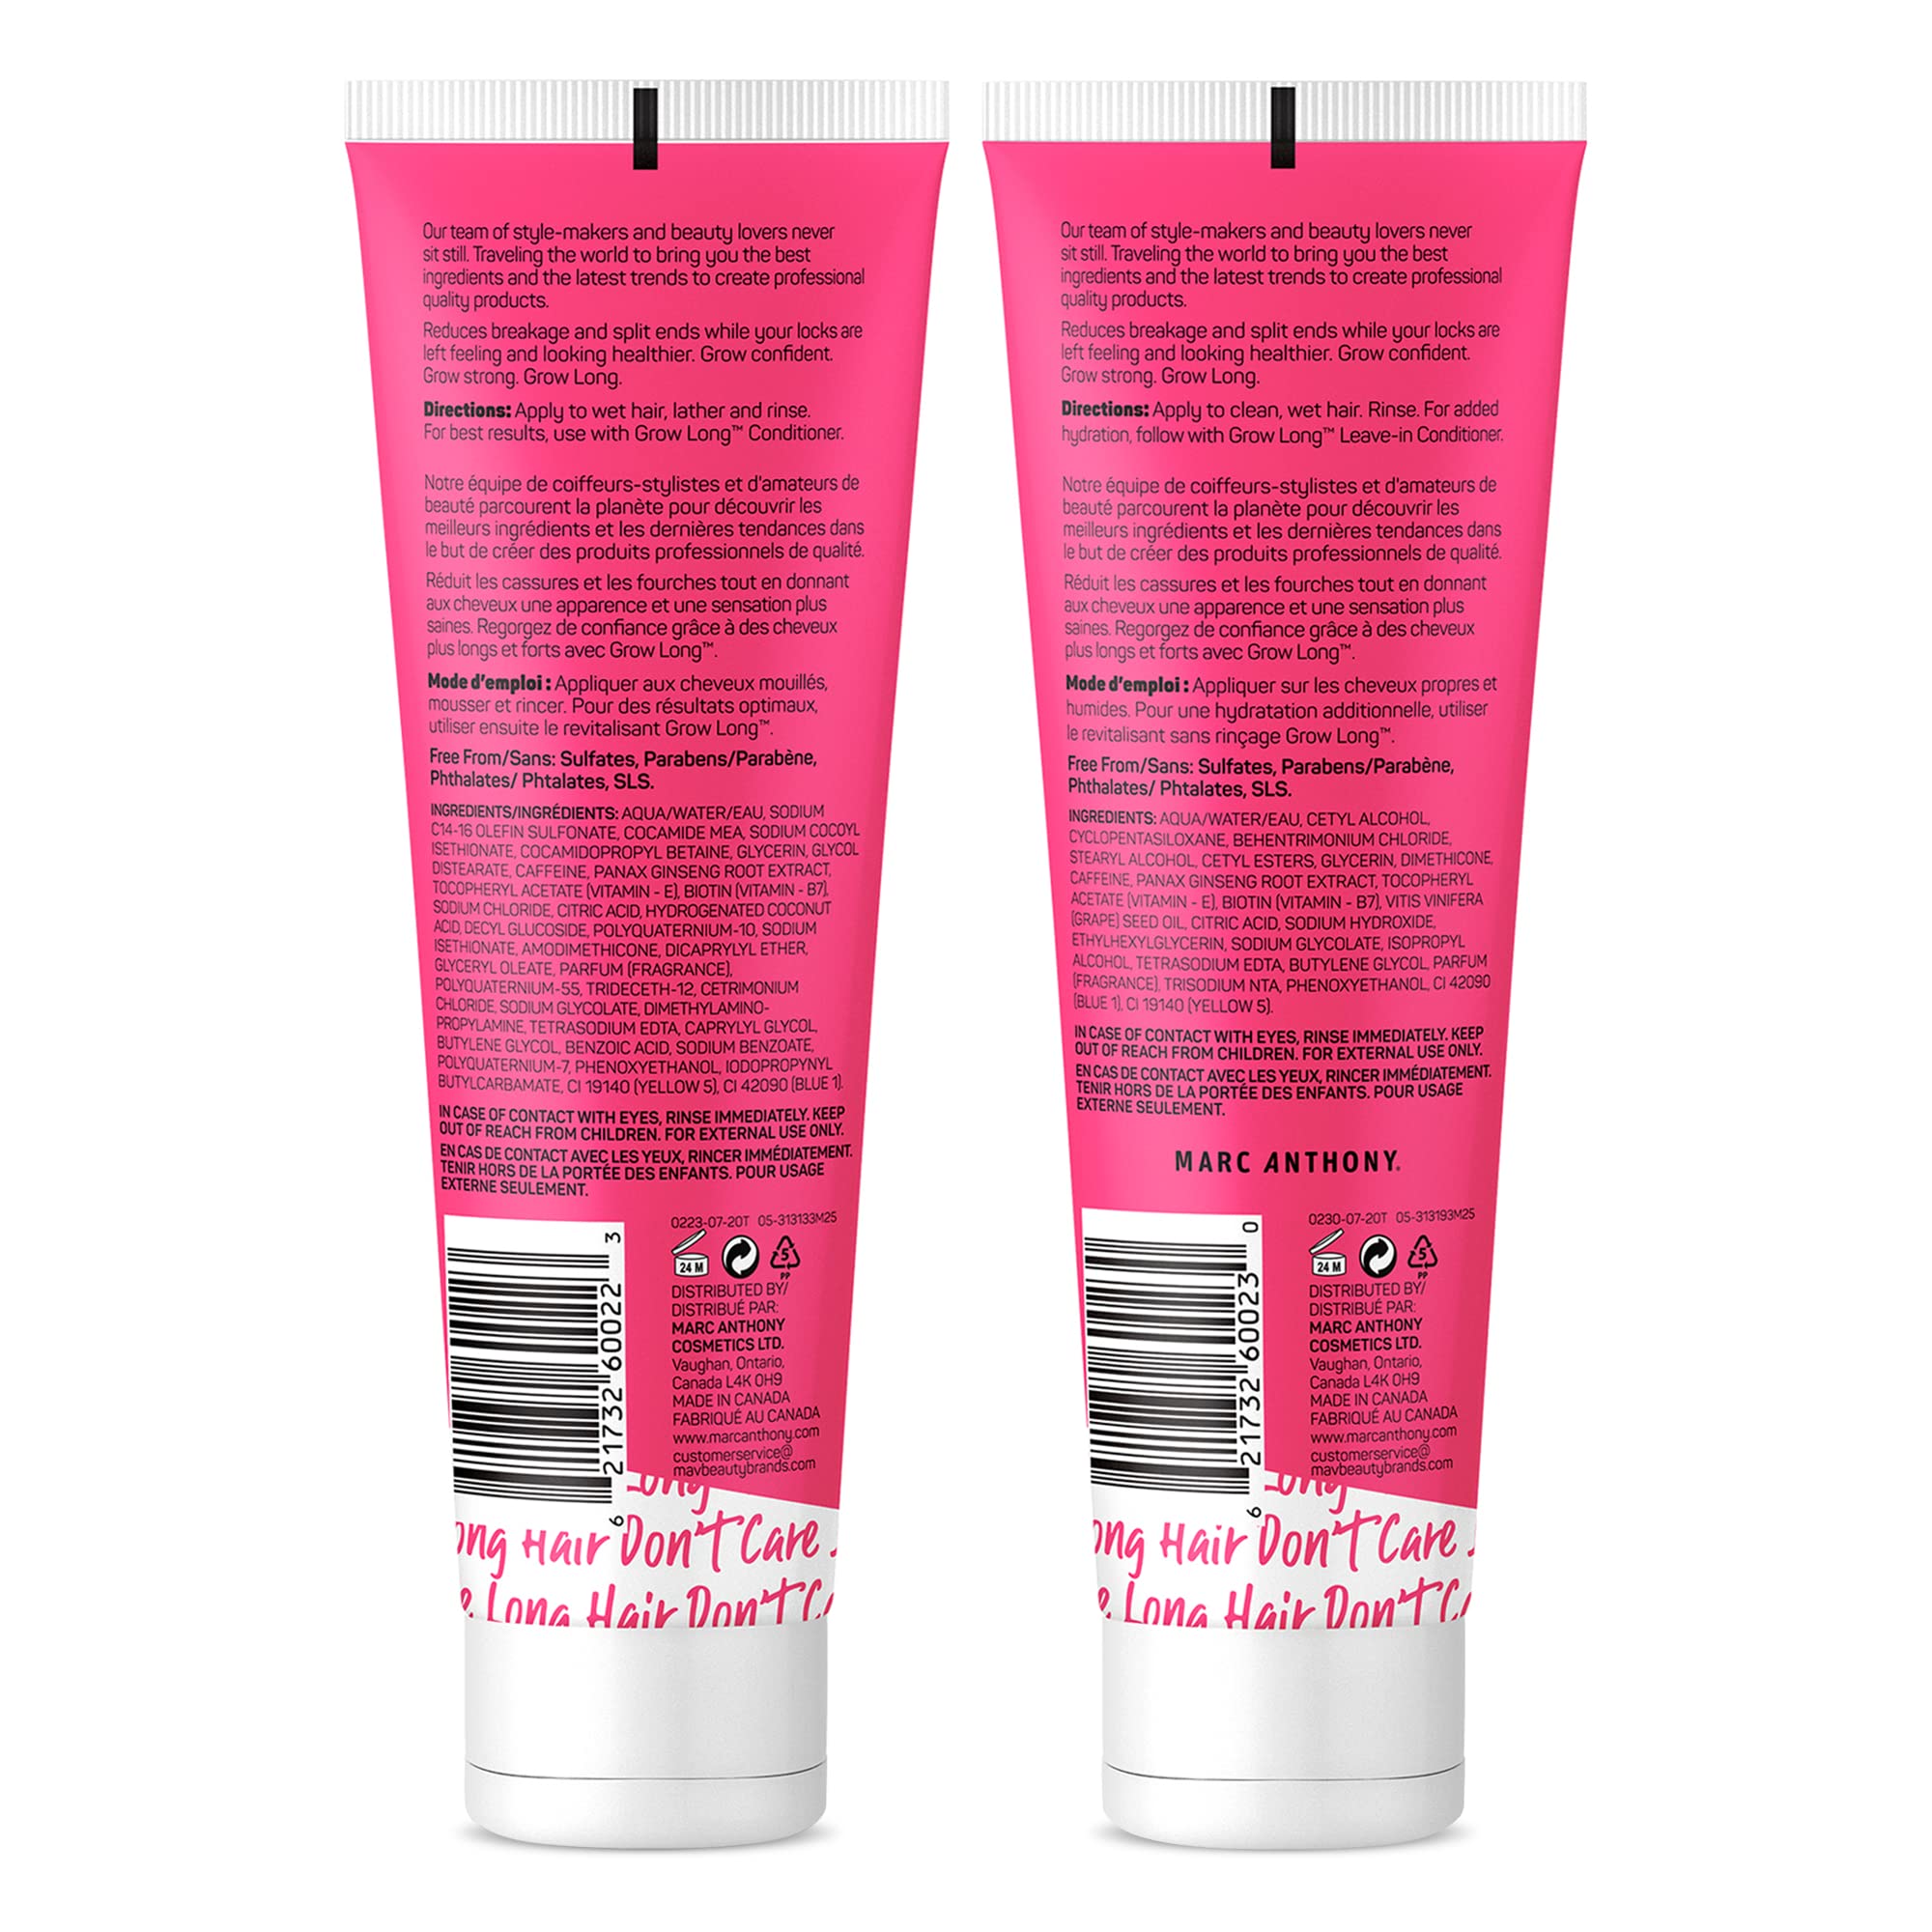 Marc Anthony Shampoo and Conditioner Gift Set, Grow Long Biotin - Anti-Frizz Deep Conditioner For Split Ends & Breakage - Vitamin E, Caffeine & Ginseng for Curly, Dry & Damaged Hair